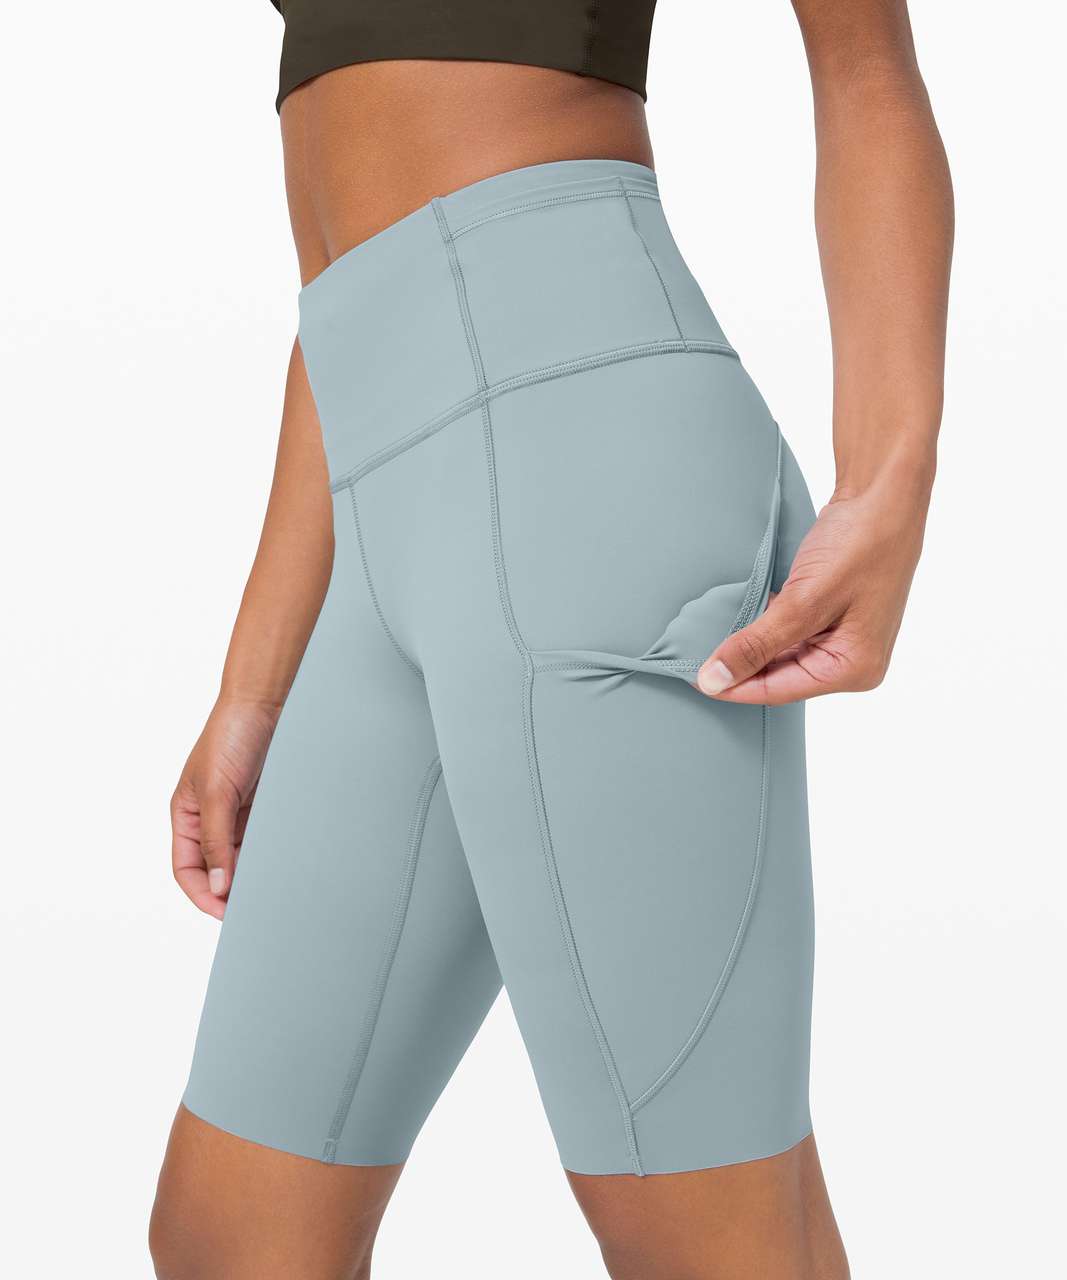 Lululemon Fast And Free Short 10" *Non-Reflective - Blue Cast